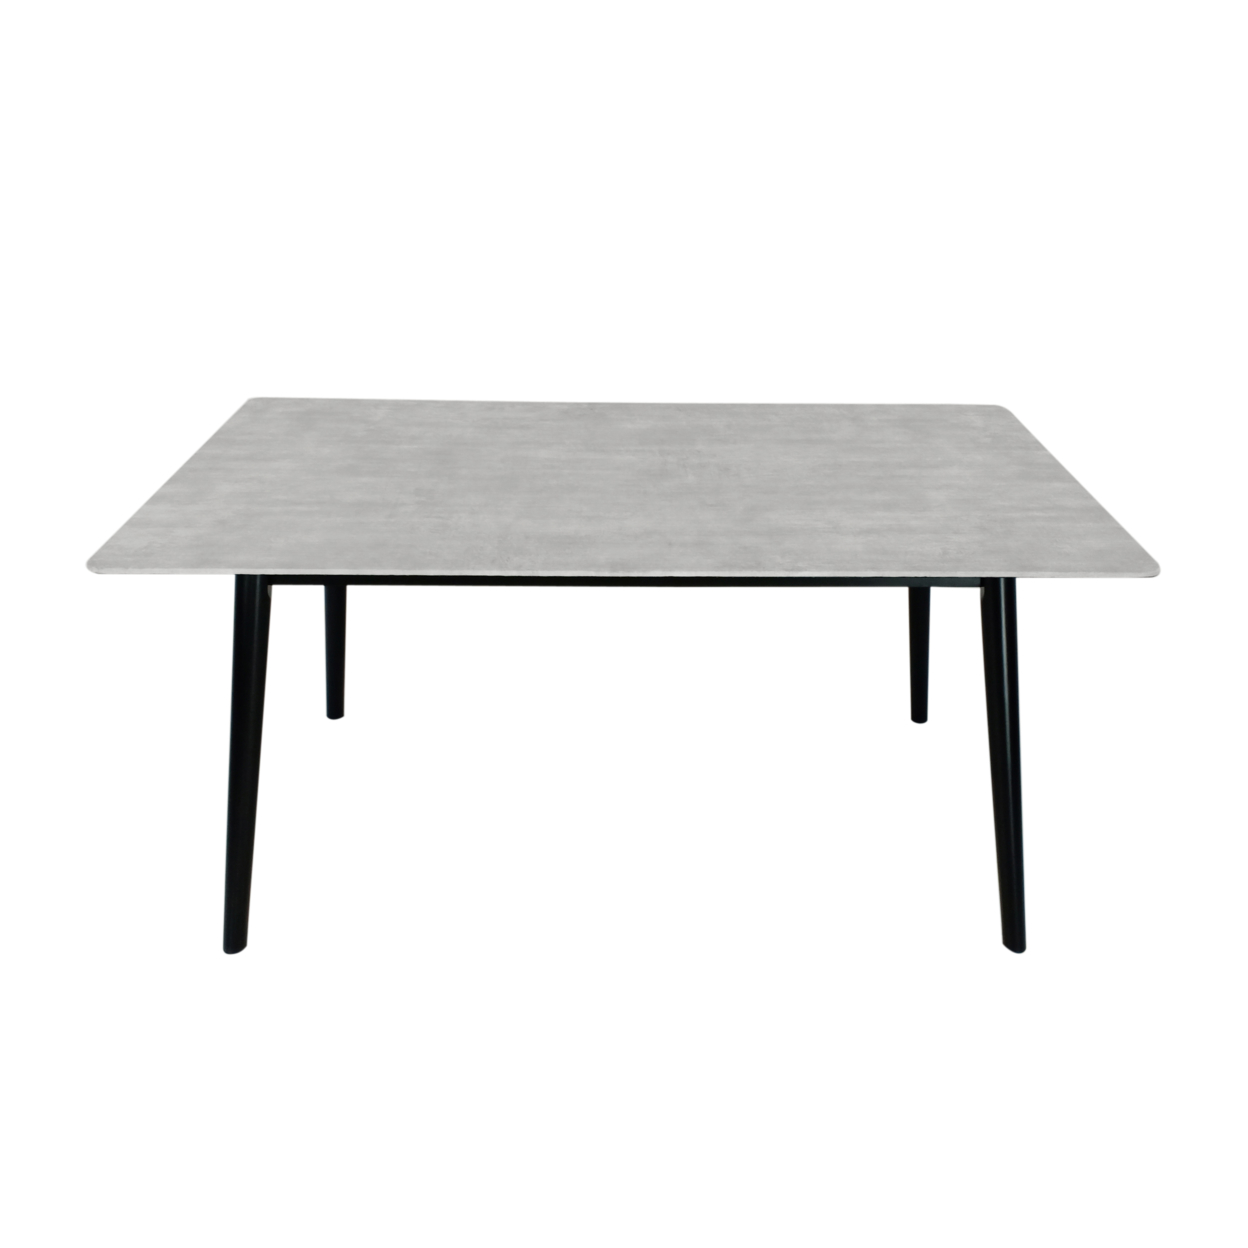 Riley Modern Dining Table With Rubberwood Legs And Laminate Table Top - Gray Finish + Black